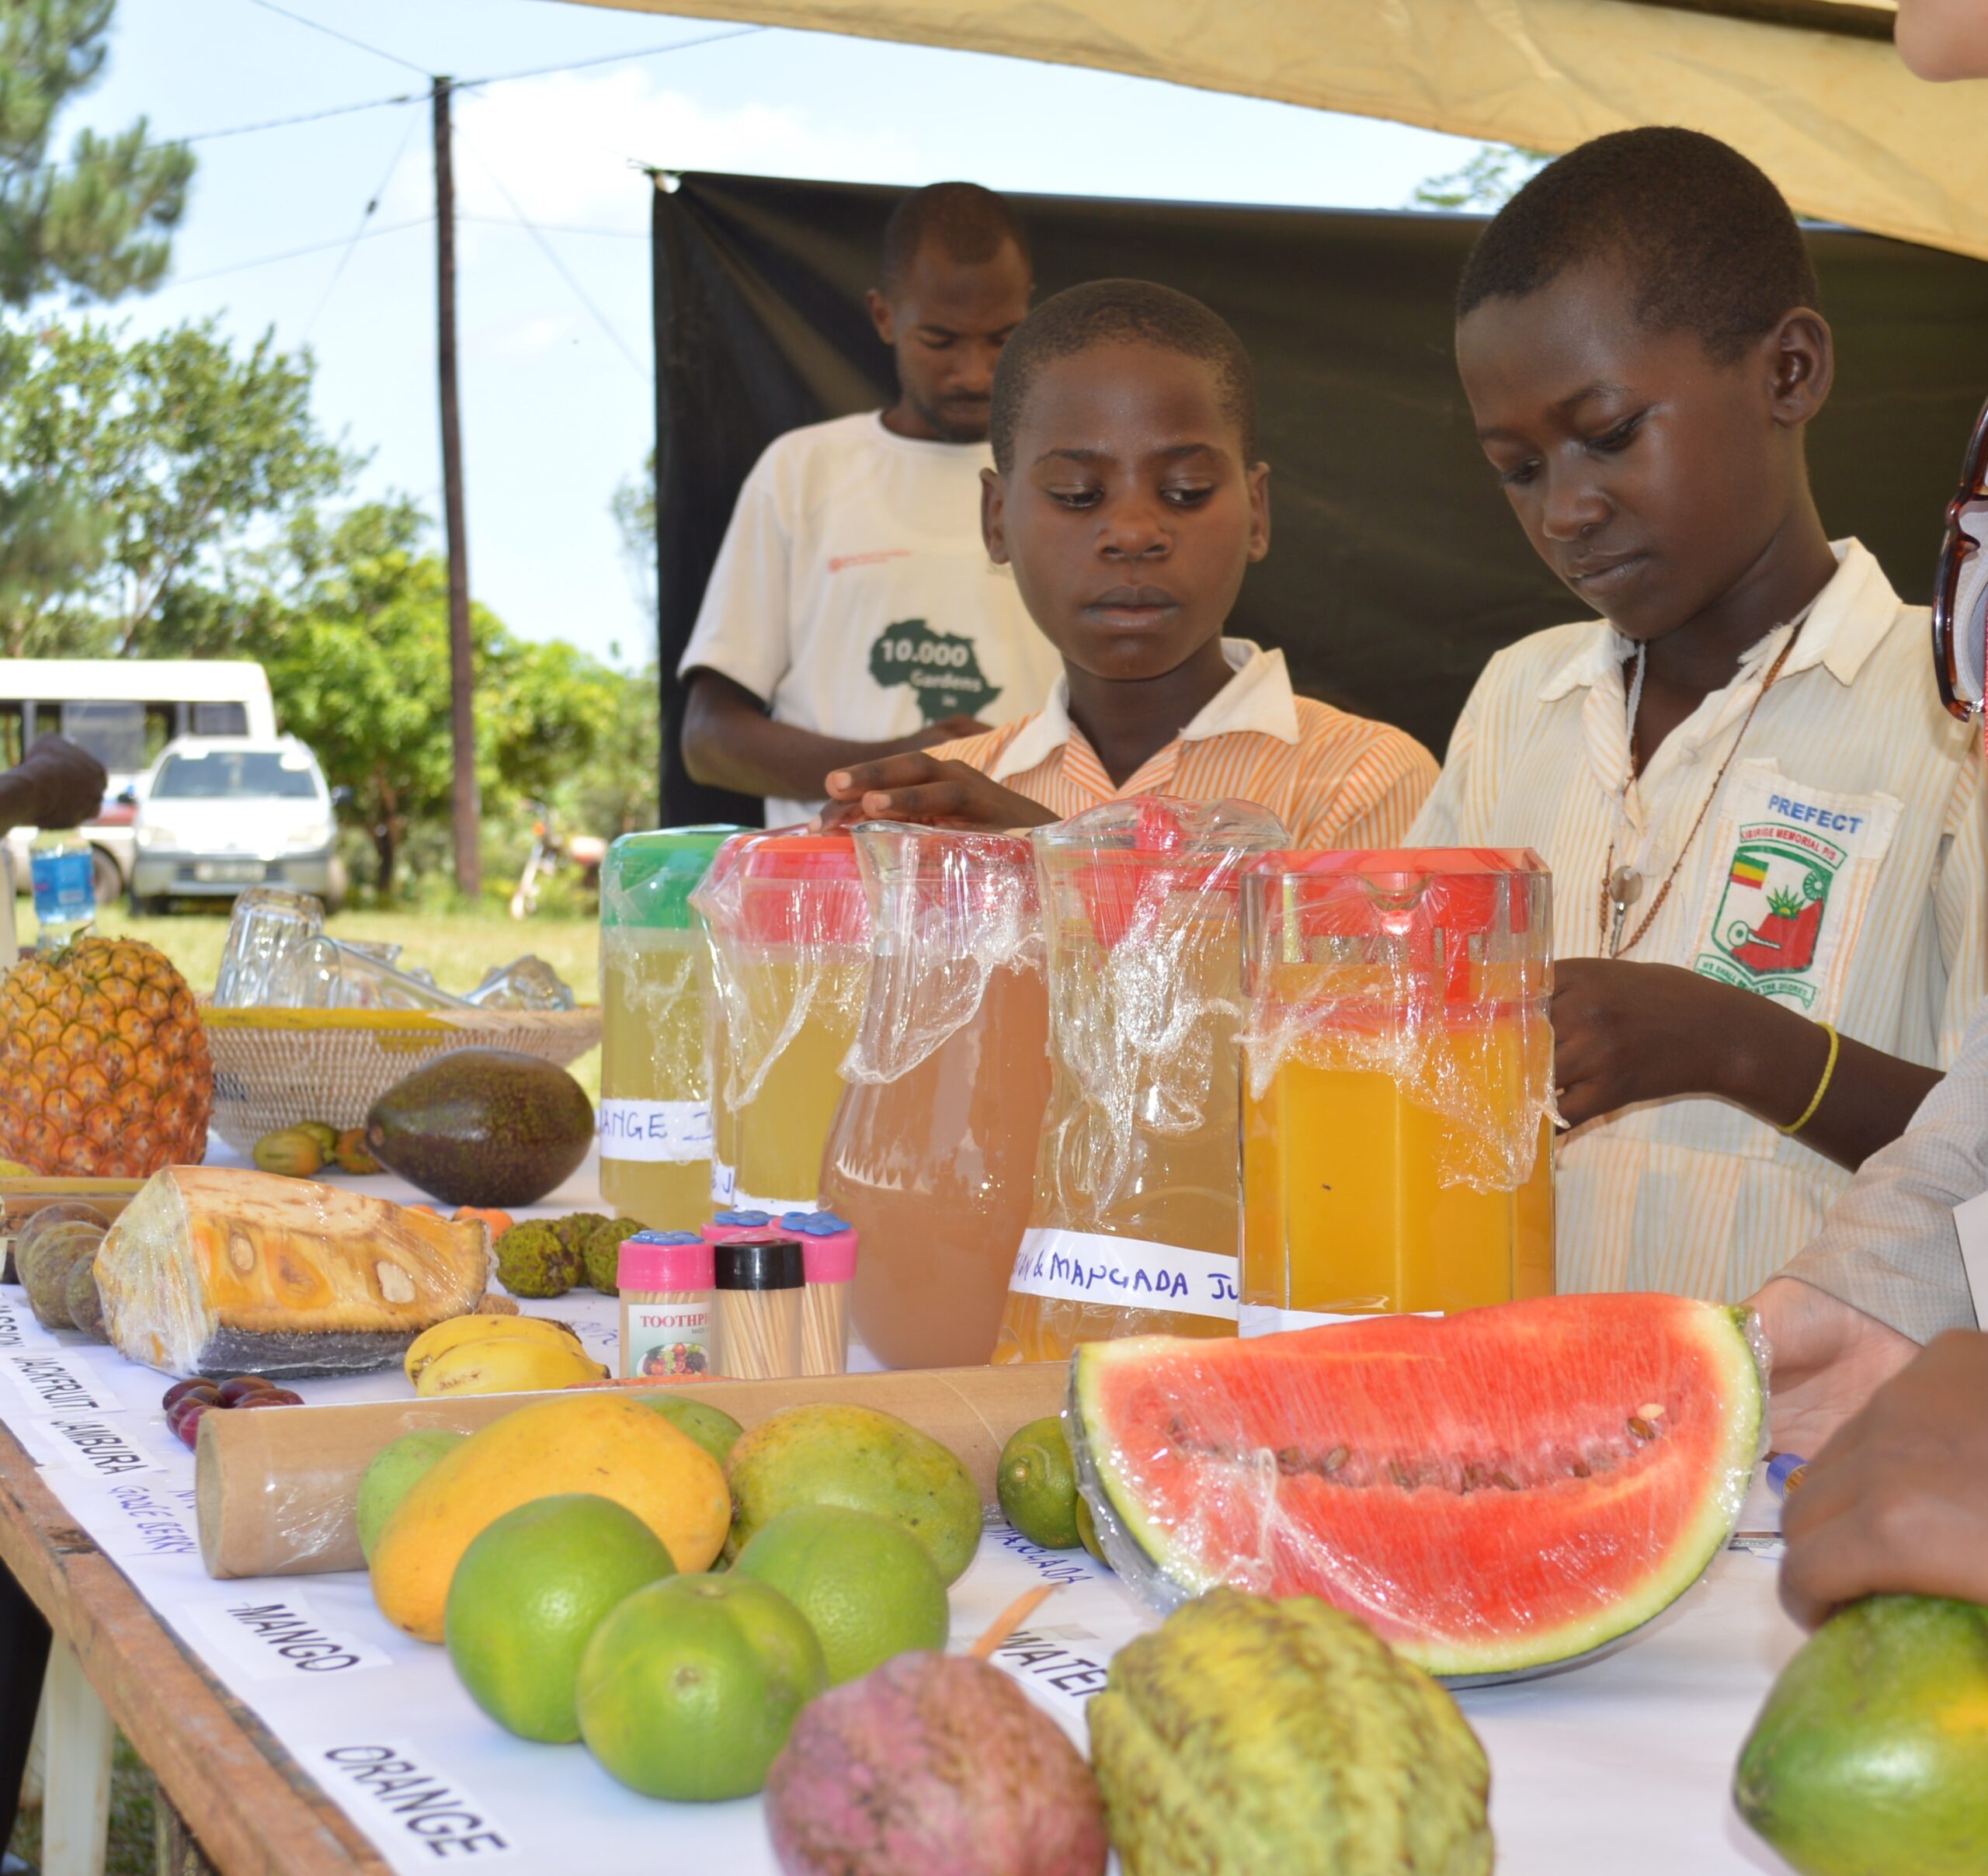 Rediscovering the value of indigenous fruits through Uganda’s Fruit and Juice Festival